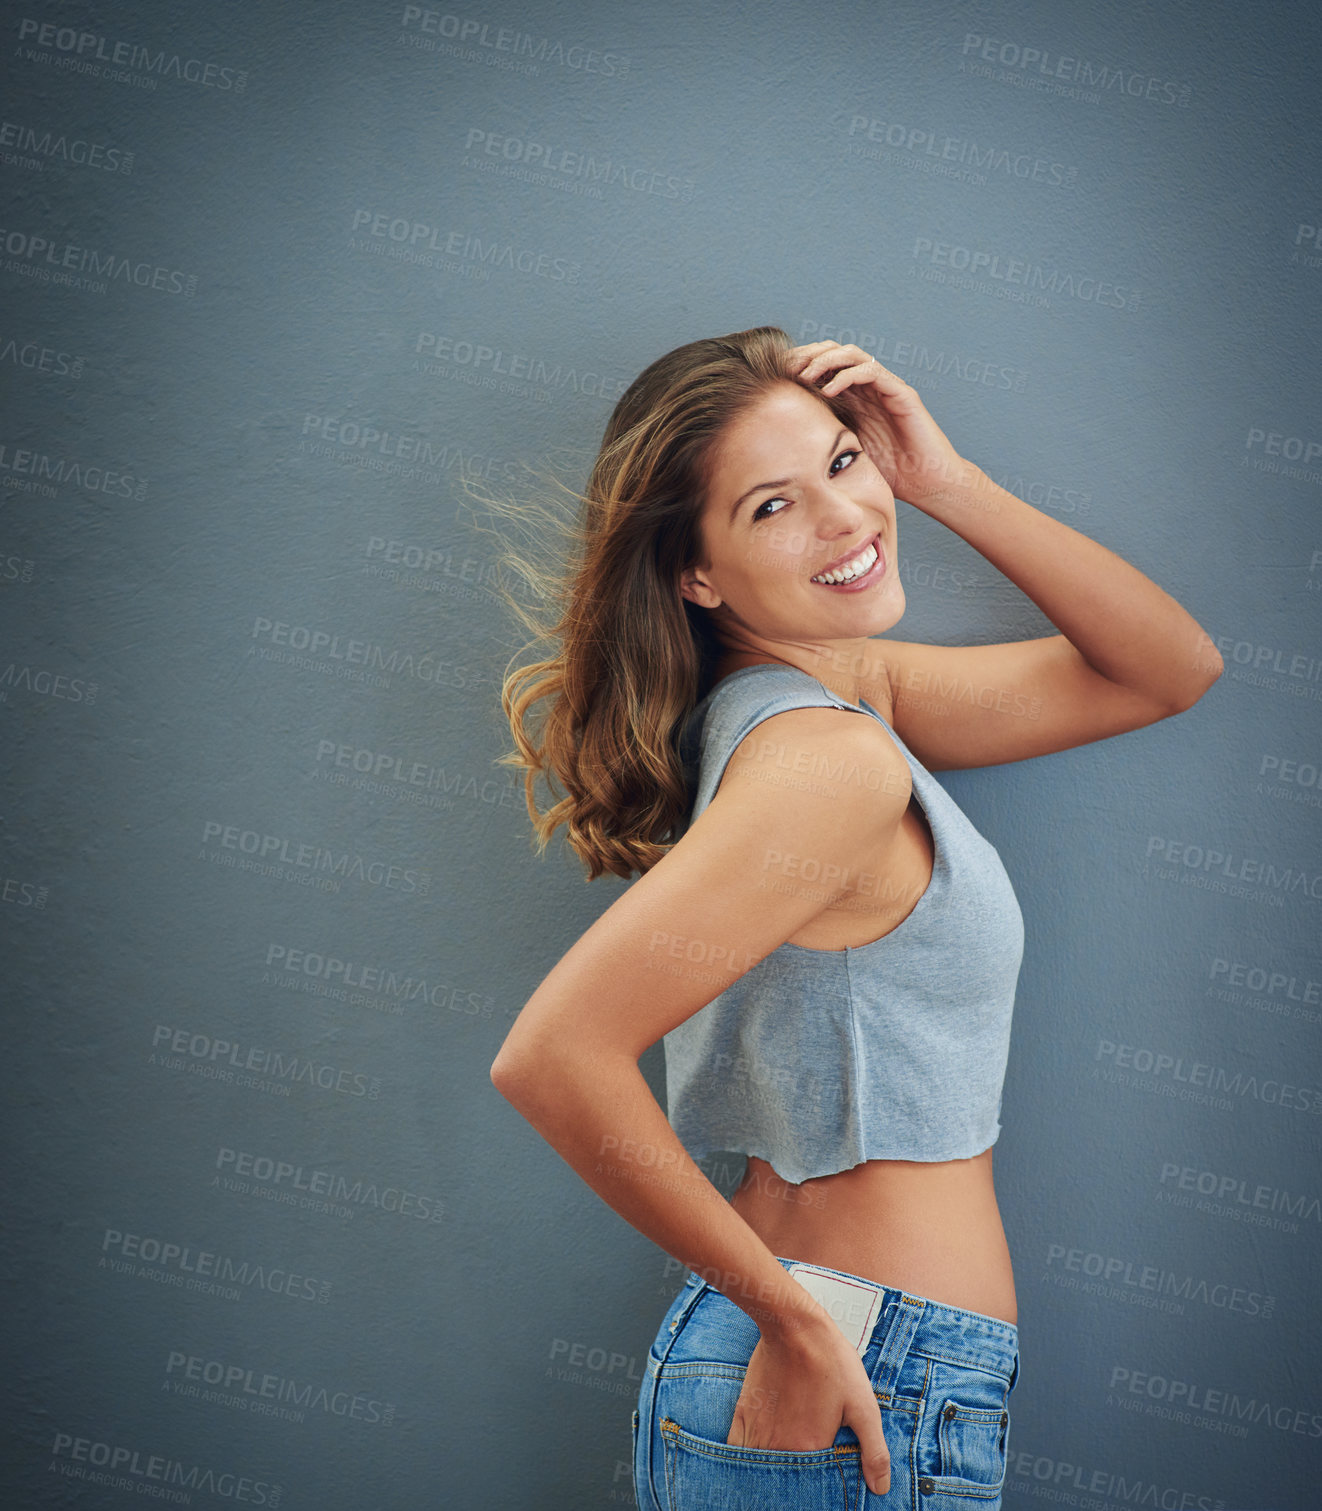 Buy stock photo Studio shot of a happy young woman posing against a gray background